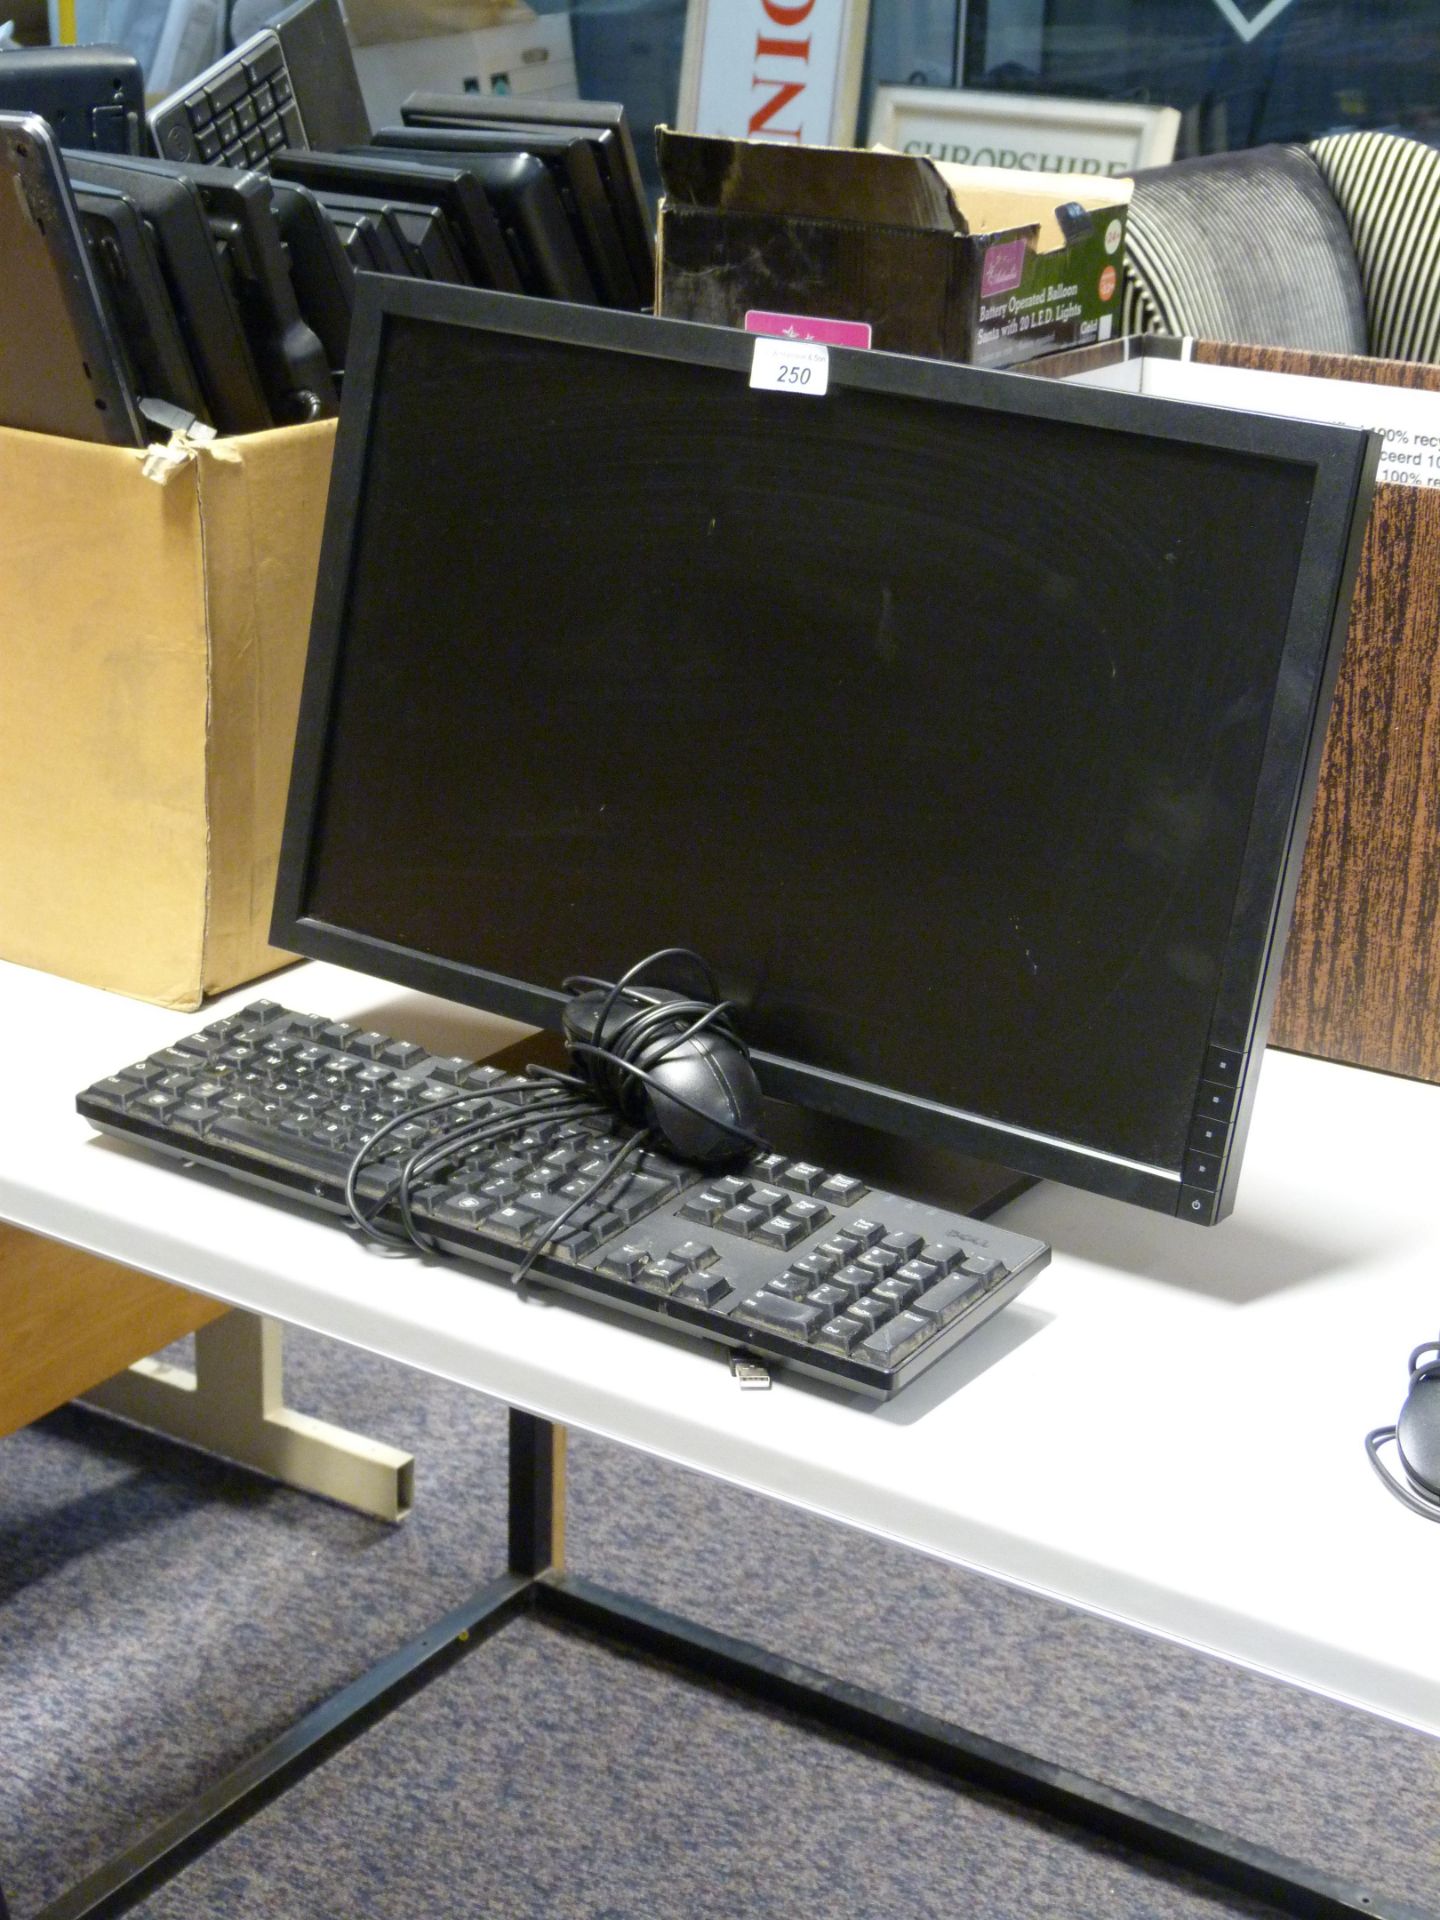 Dell monitor together with keyboard and mouse